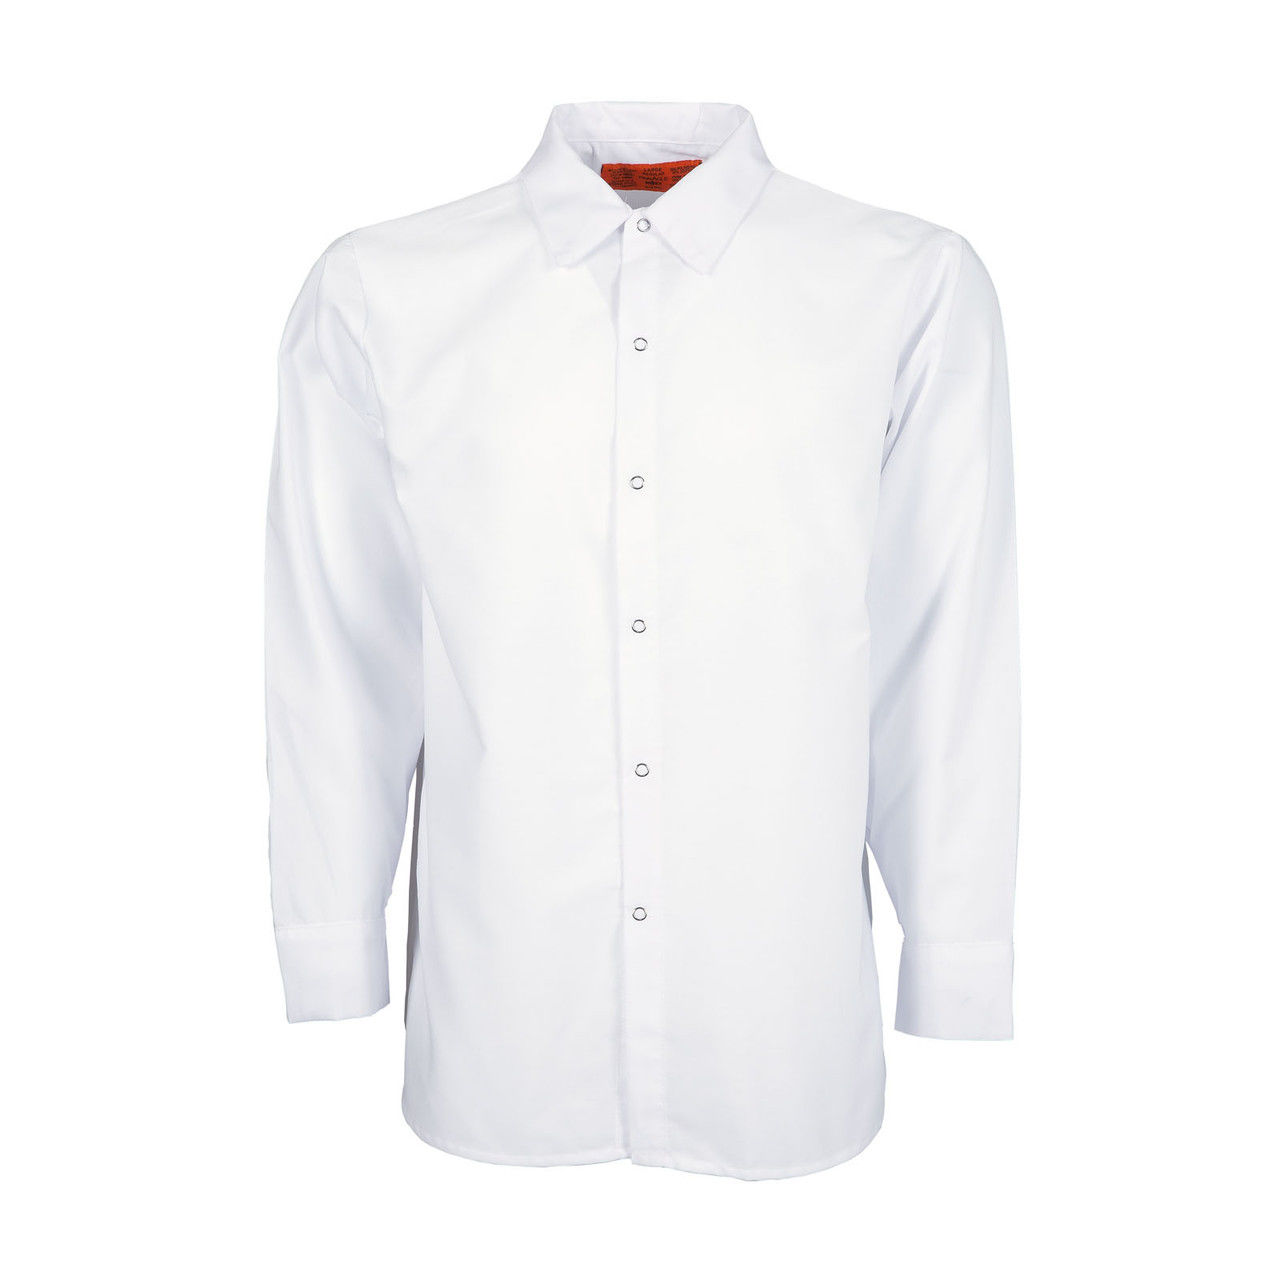 Is this mens white work shirt HACCP compliant?